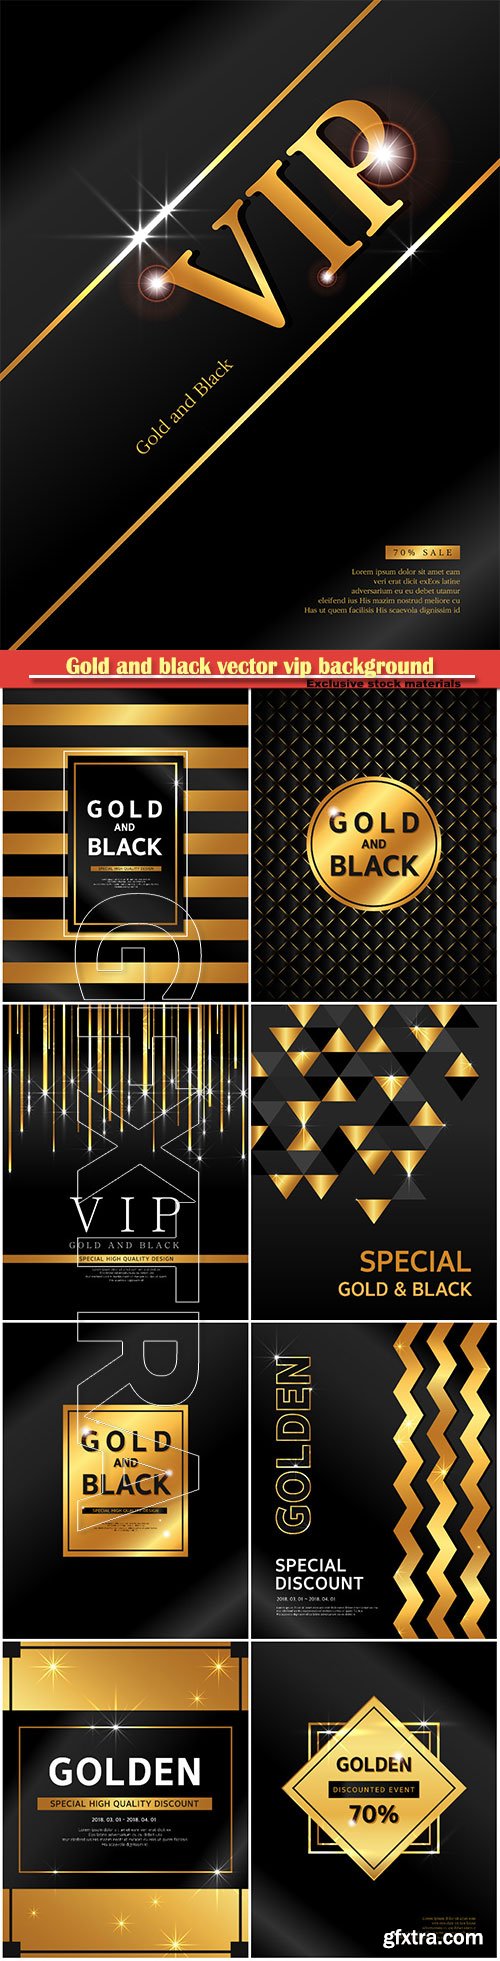 Gold and black vector vip background